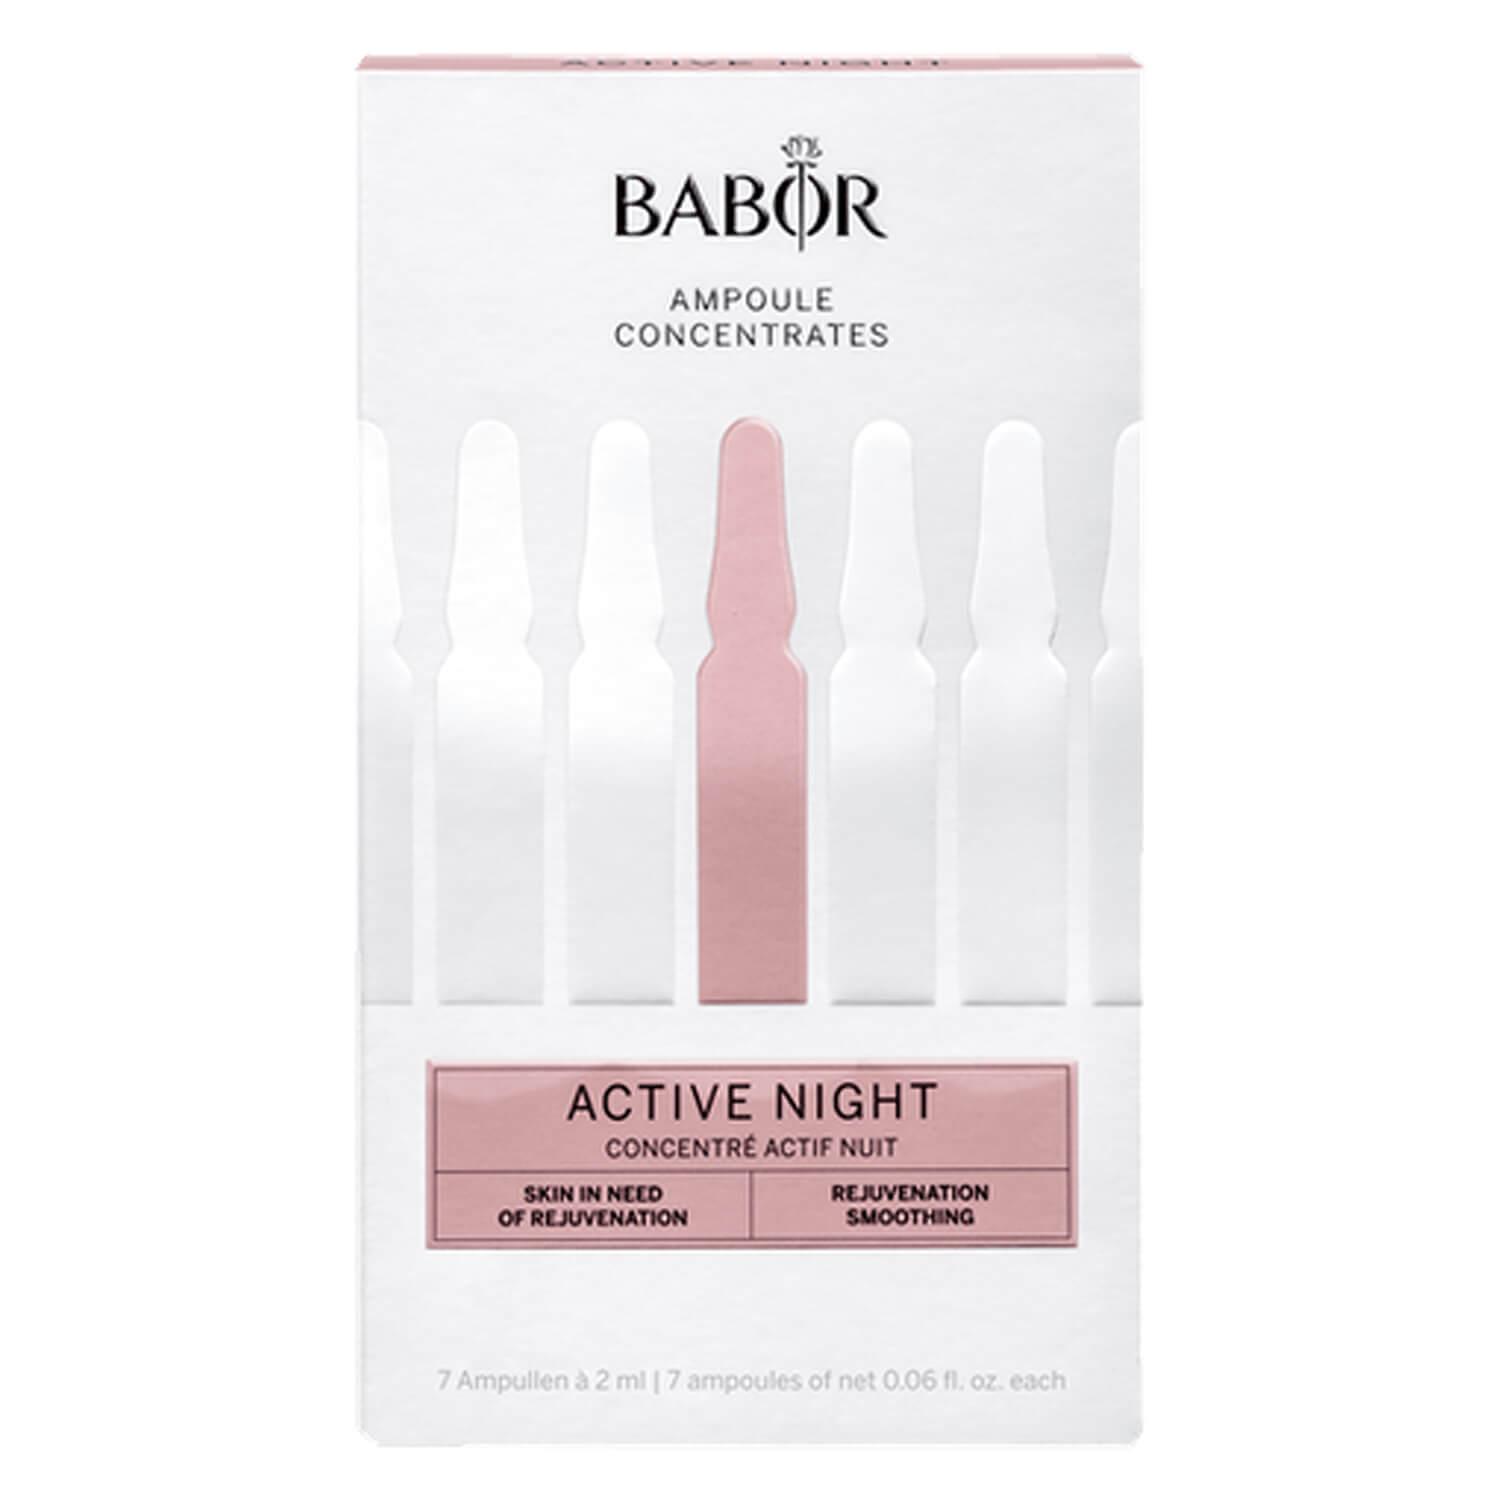 BABOR AMPOULE CONCENTRATES - Active Night